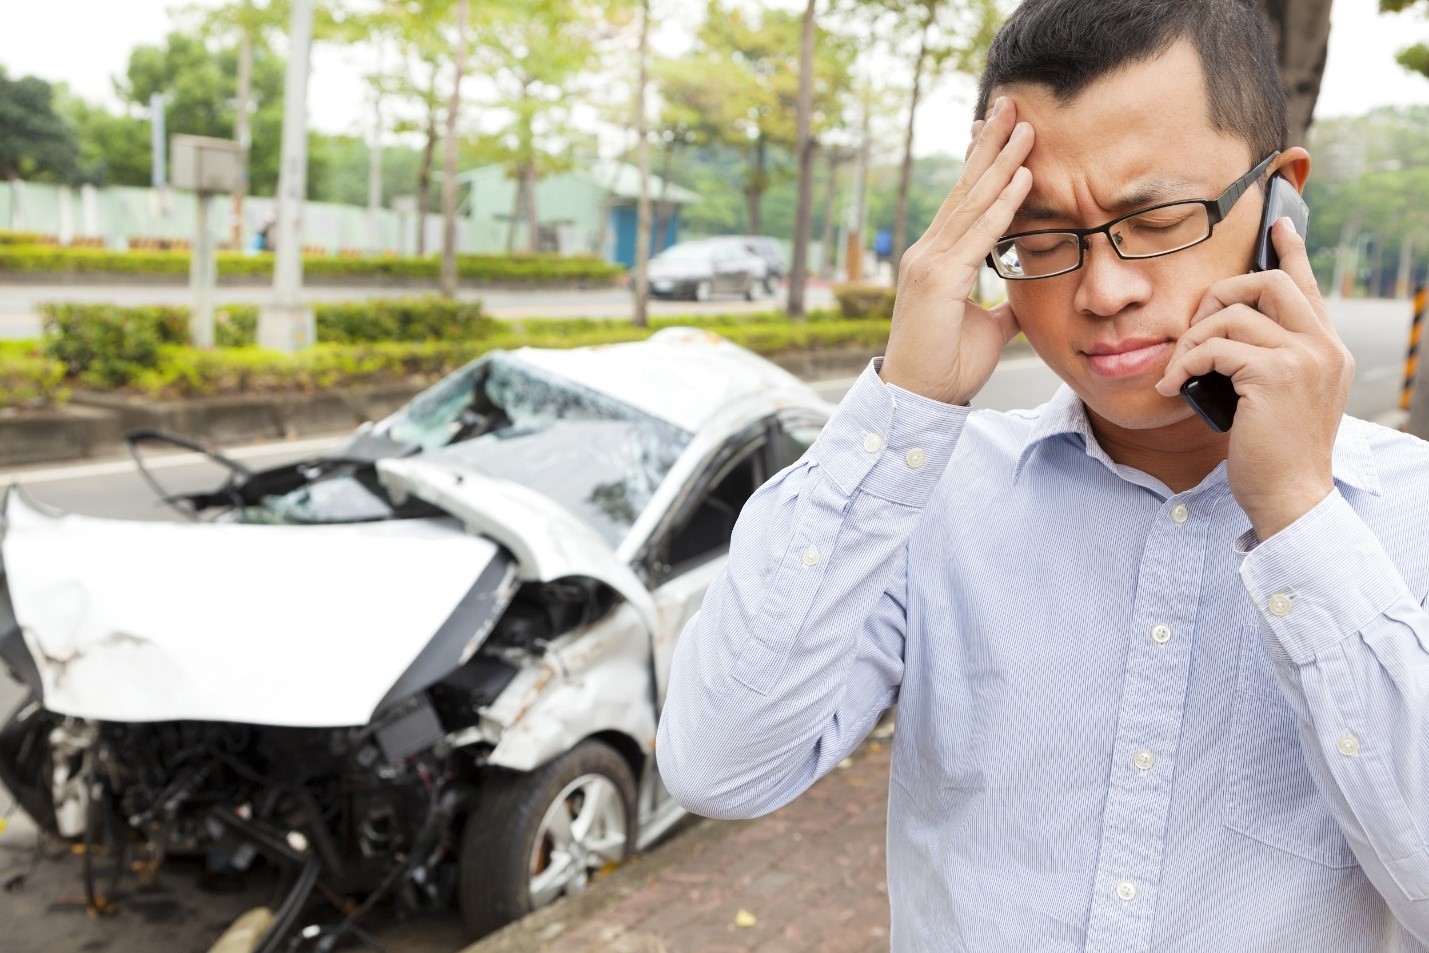 4 Things You Should Do After a Car Accident